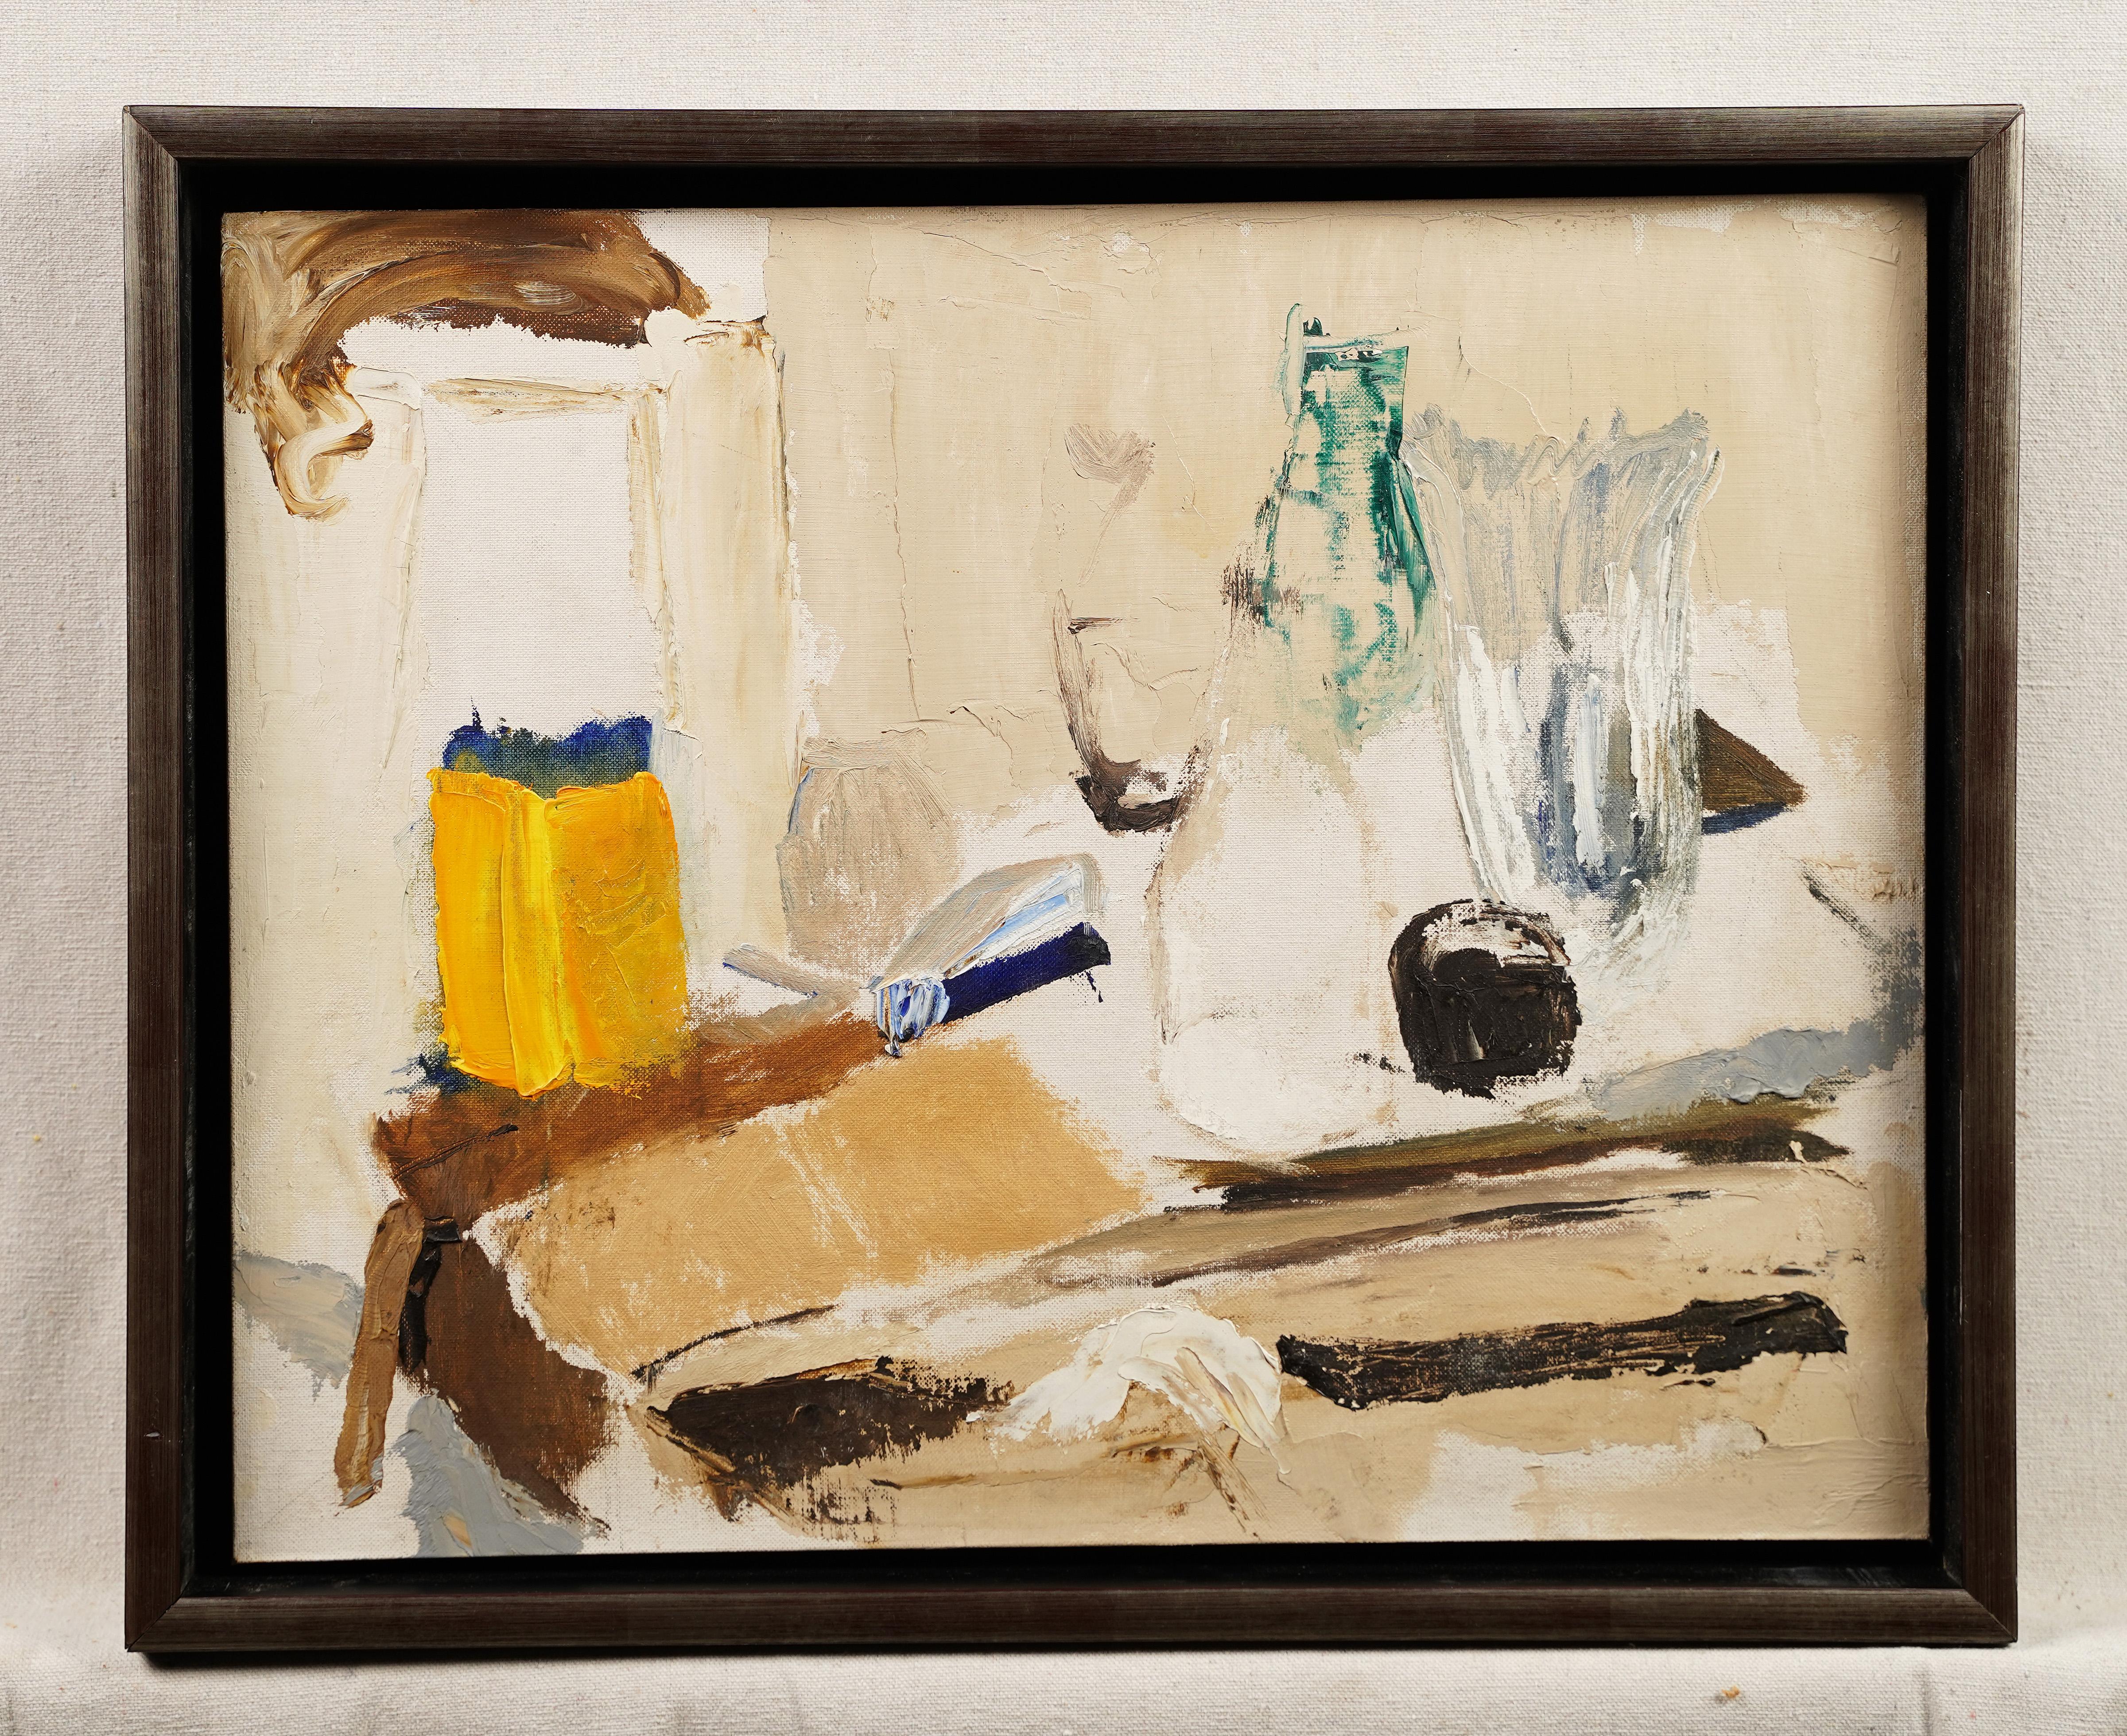 Vintage modernist abstract kitchen still life oil painting.  Oil on board. Framed.  Image size, 20L x 16H.